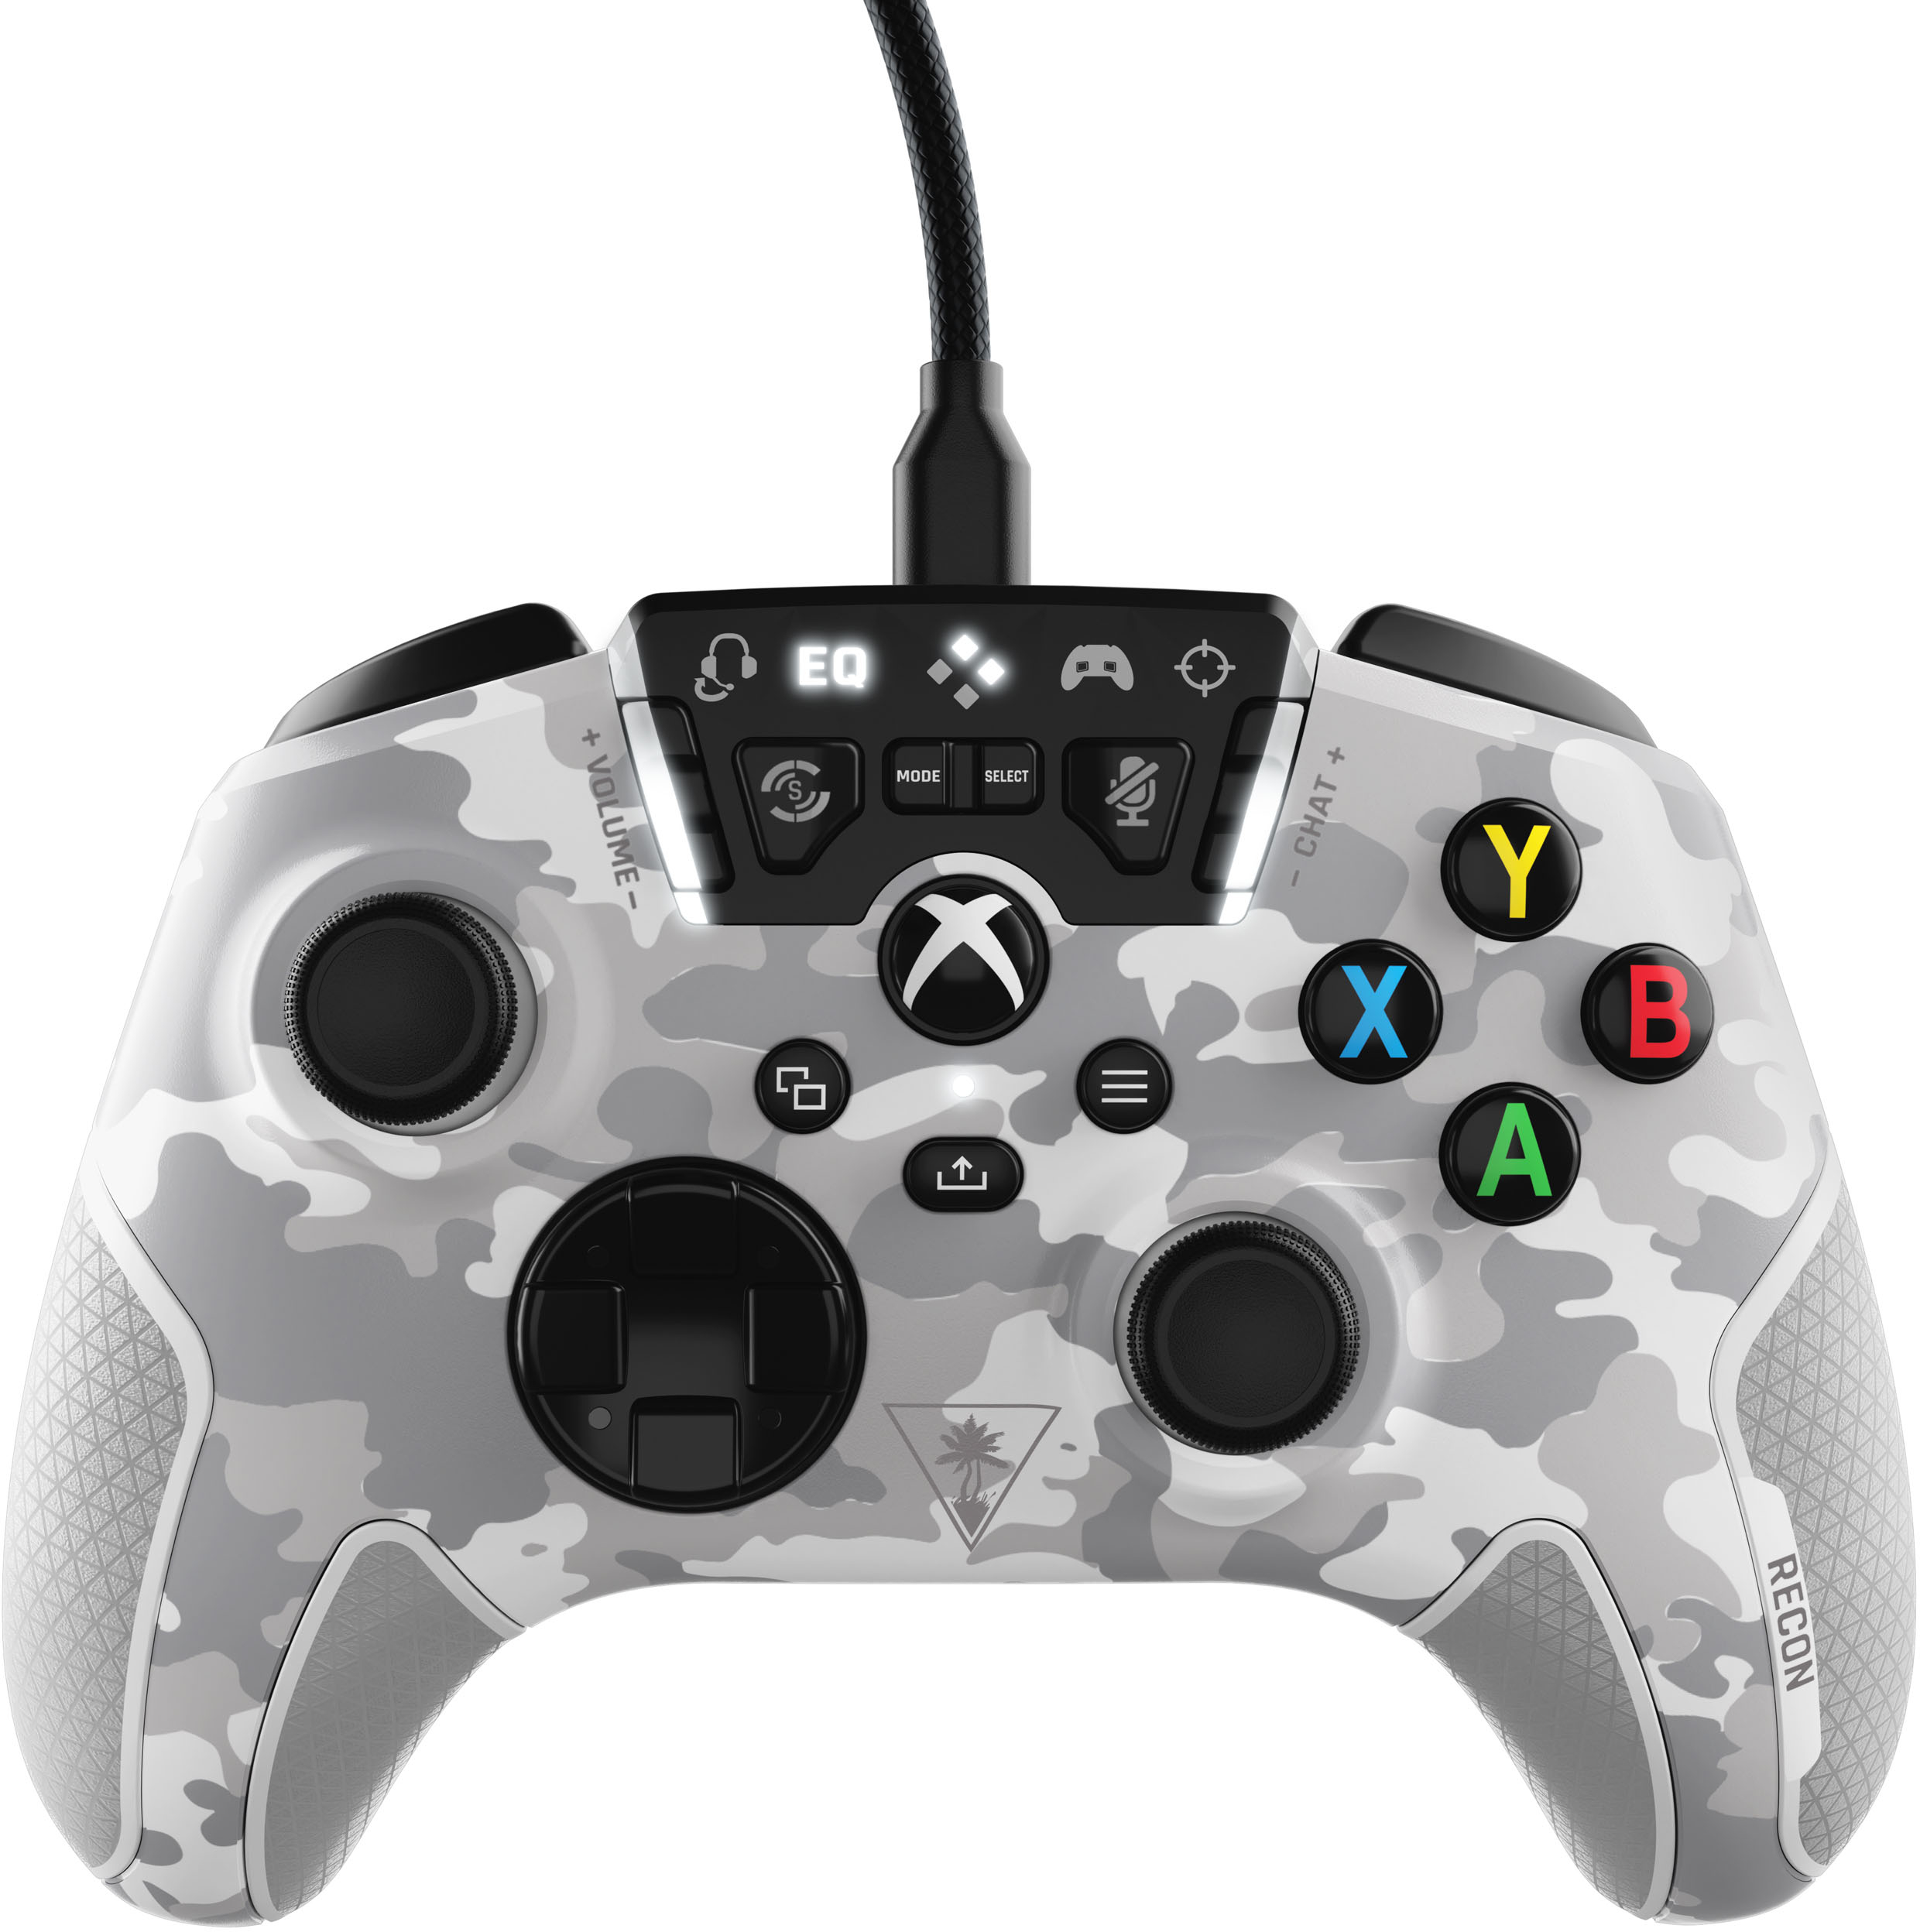 - One TBS-0707-01 Wired S, Buy Best Controller Camo Series & Arctic Series Buttons Beach Xbox X, PCs Controller Turtle with Remappable for Recon Xbox Xbox Windows